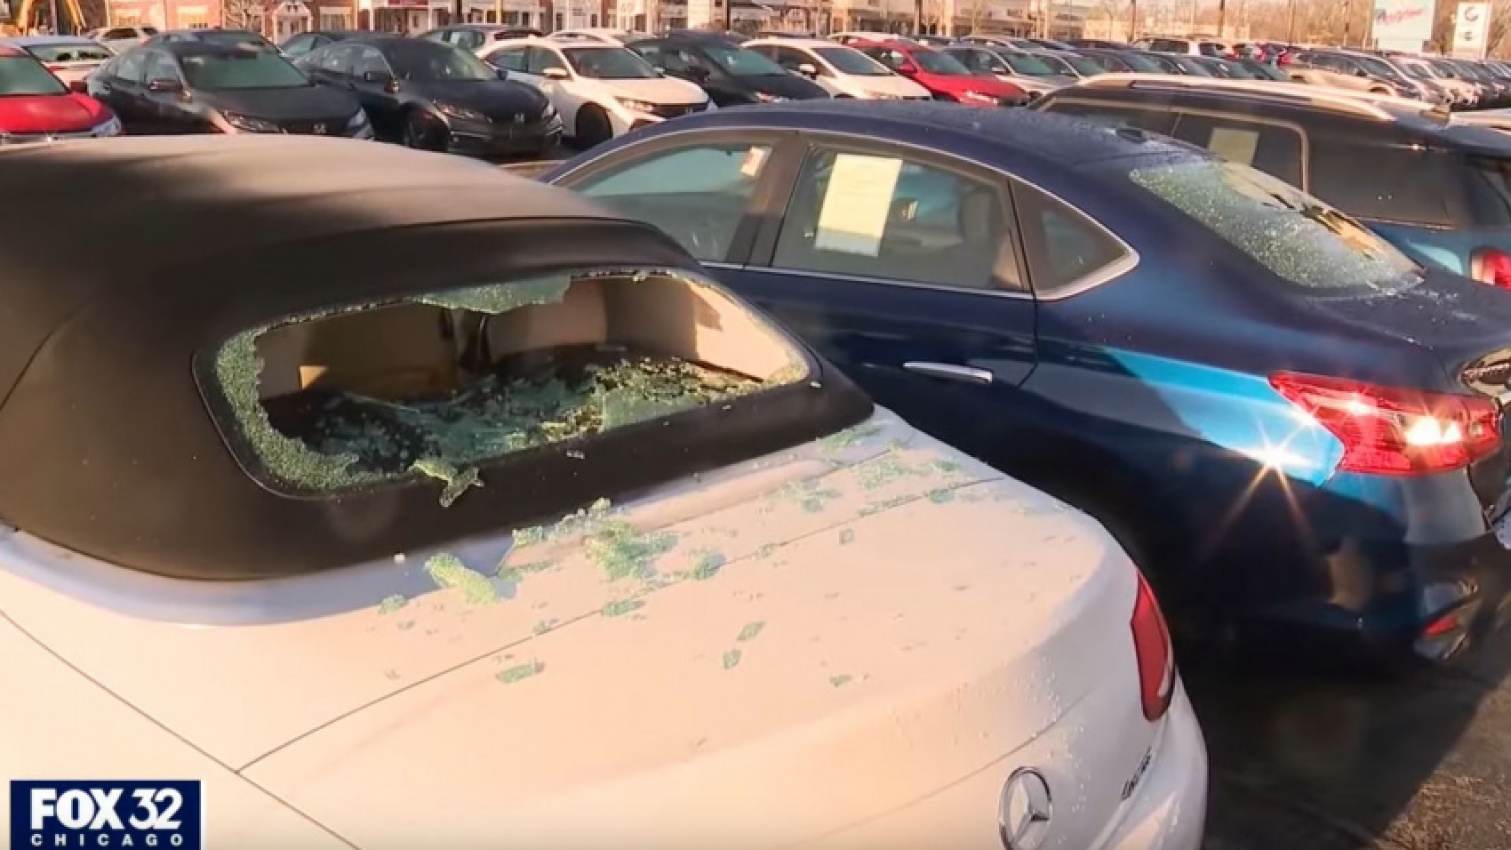 autos, cars, american, asian, celebrity, classic, client, europe, exotic, features, handpicked, luxury, modern classic, muscle, news, newsletter, off-road, sports, trucks, man vandalizes almost 100 dealership cars in chicago